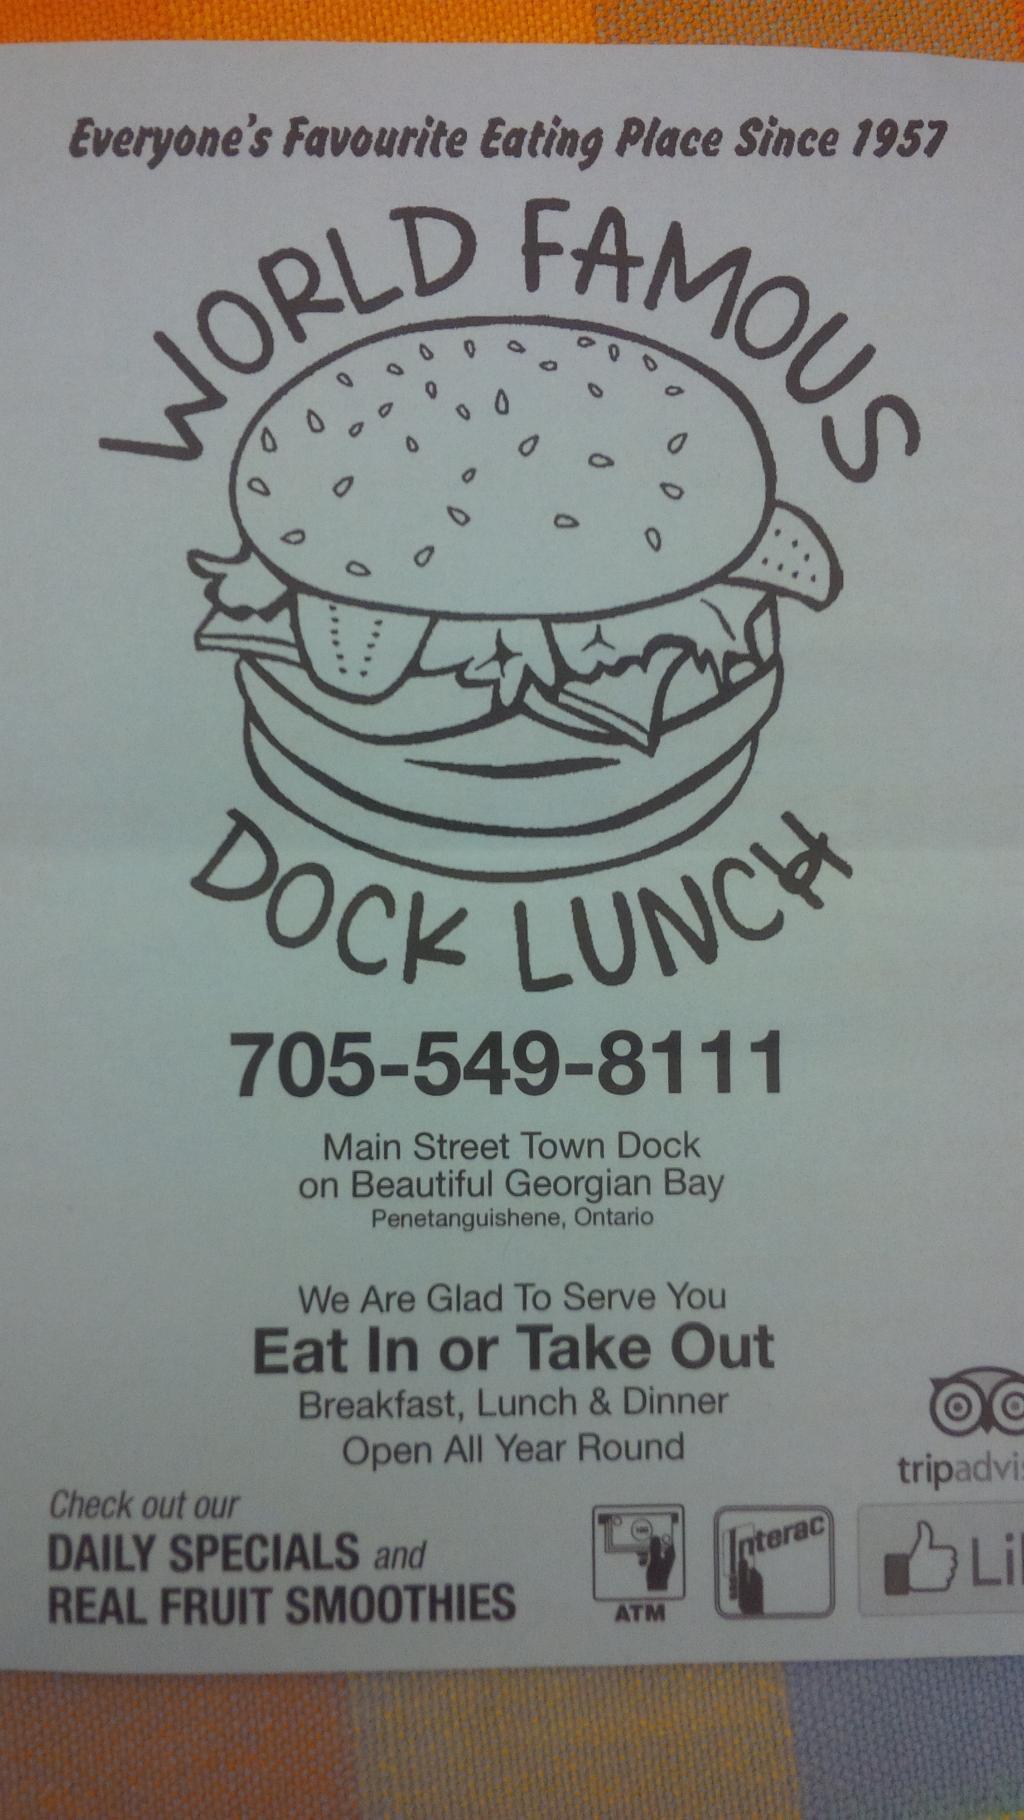 World Famous Dock Lunch